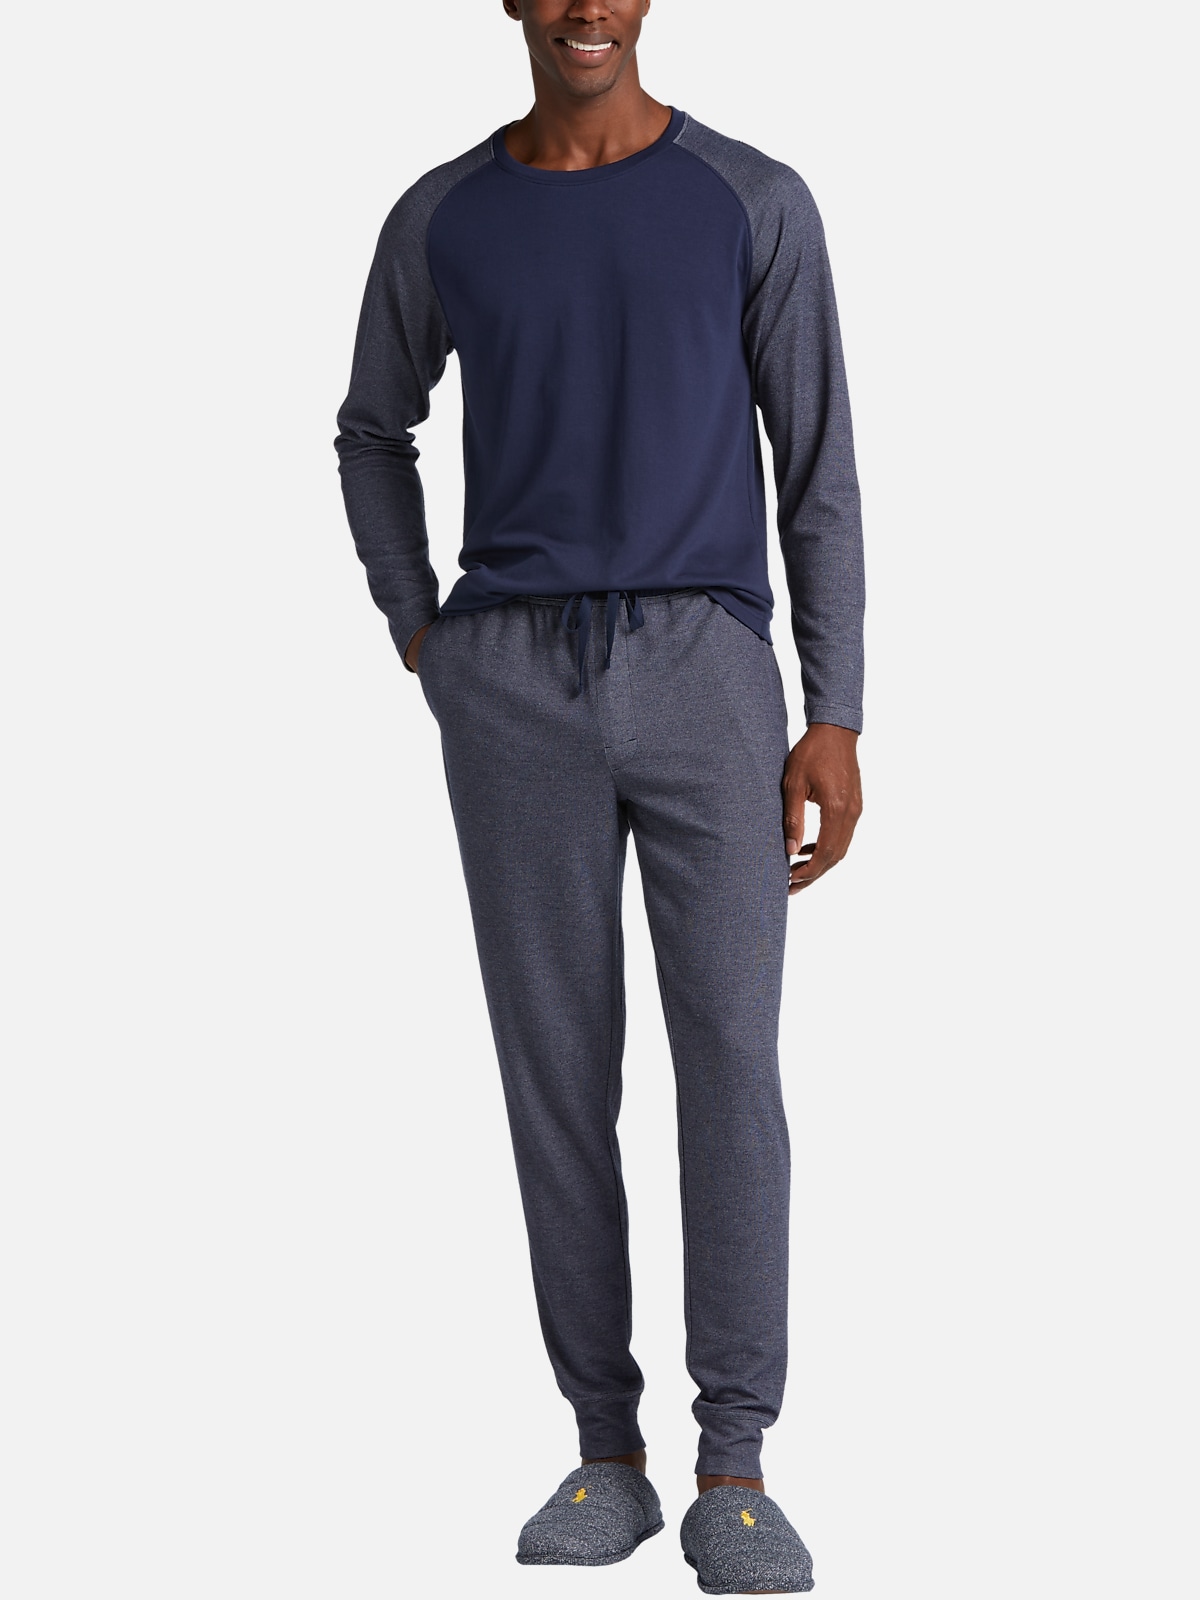 Pronto Uomo Relaxed Fit Top And Pants Pajama Set, Men's Accessories